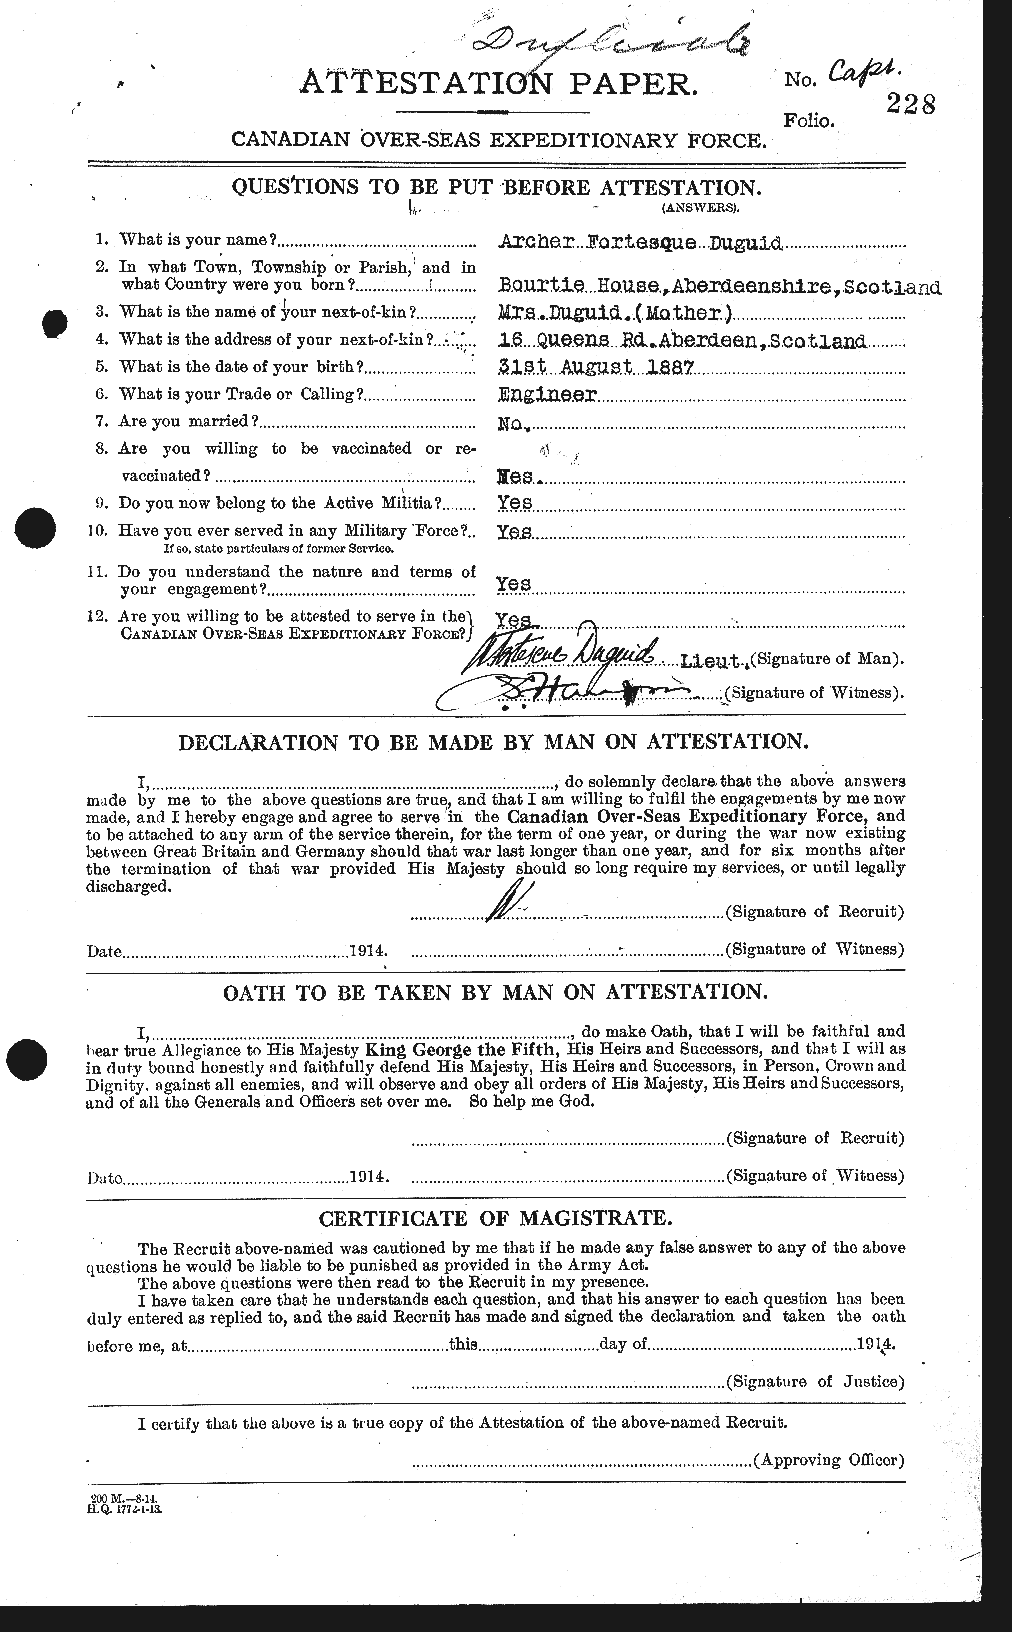 Personnel Records of the First World War - CEF 301908a